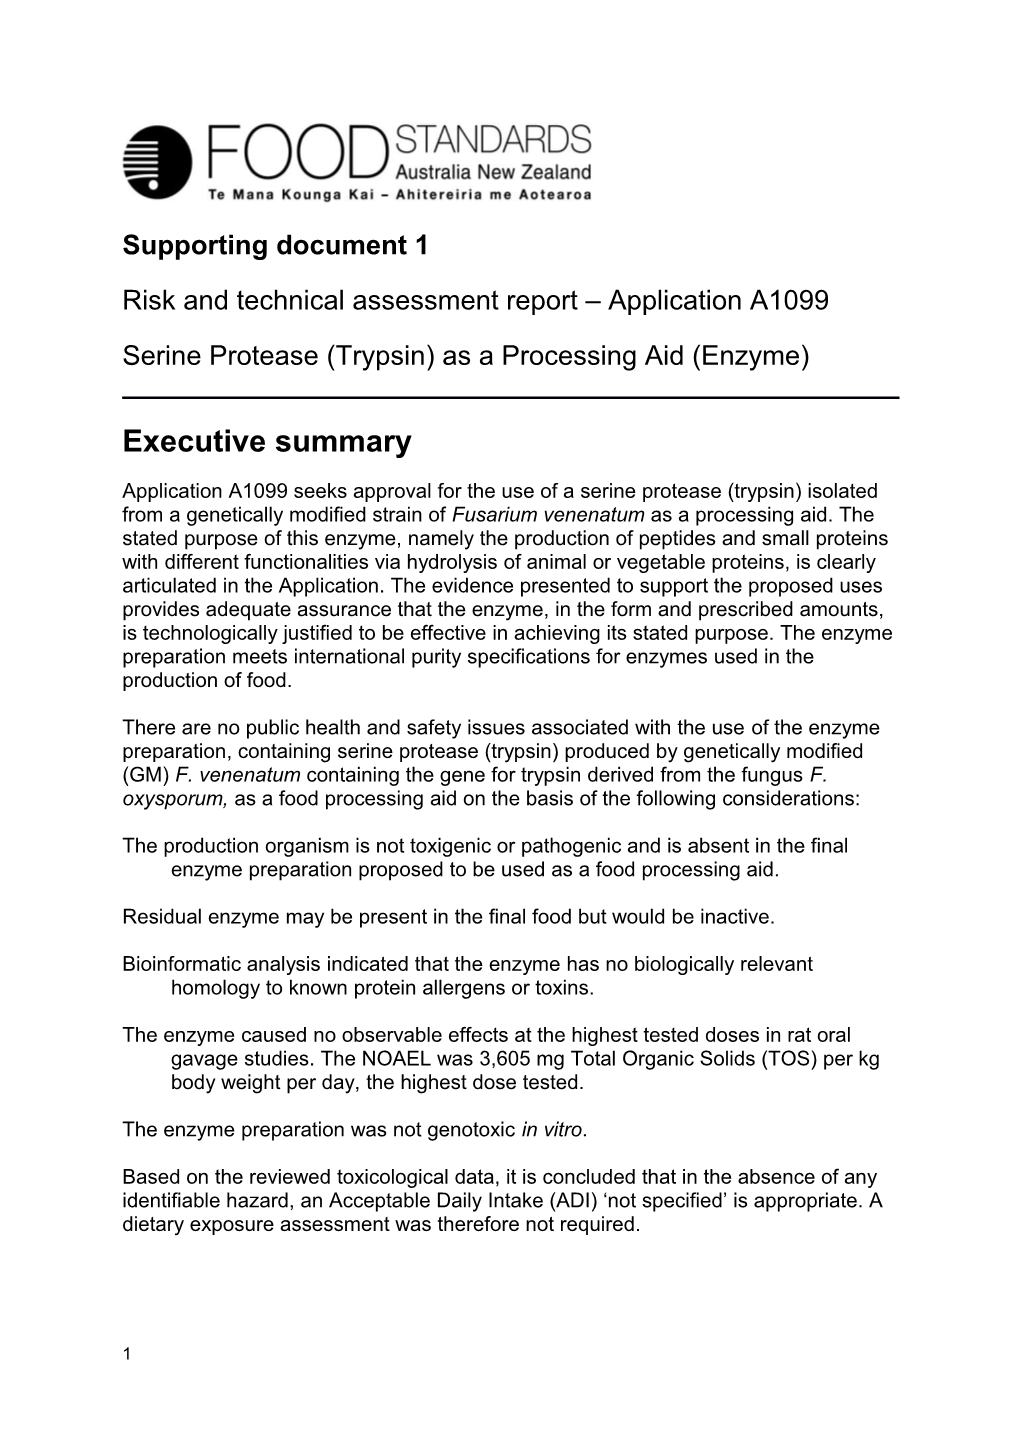 Risk and Technical Assessment Report Application A1099